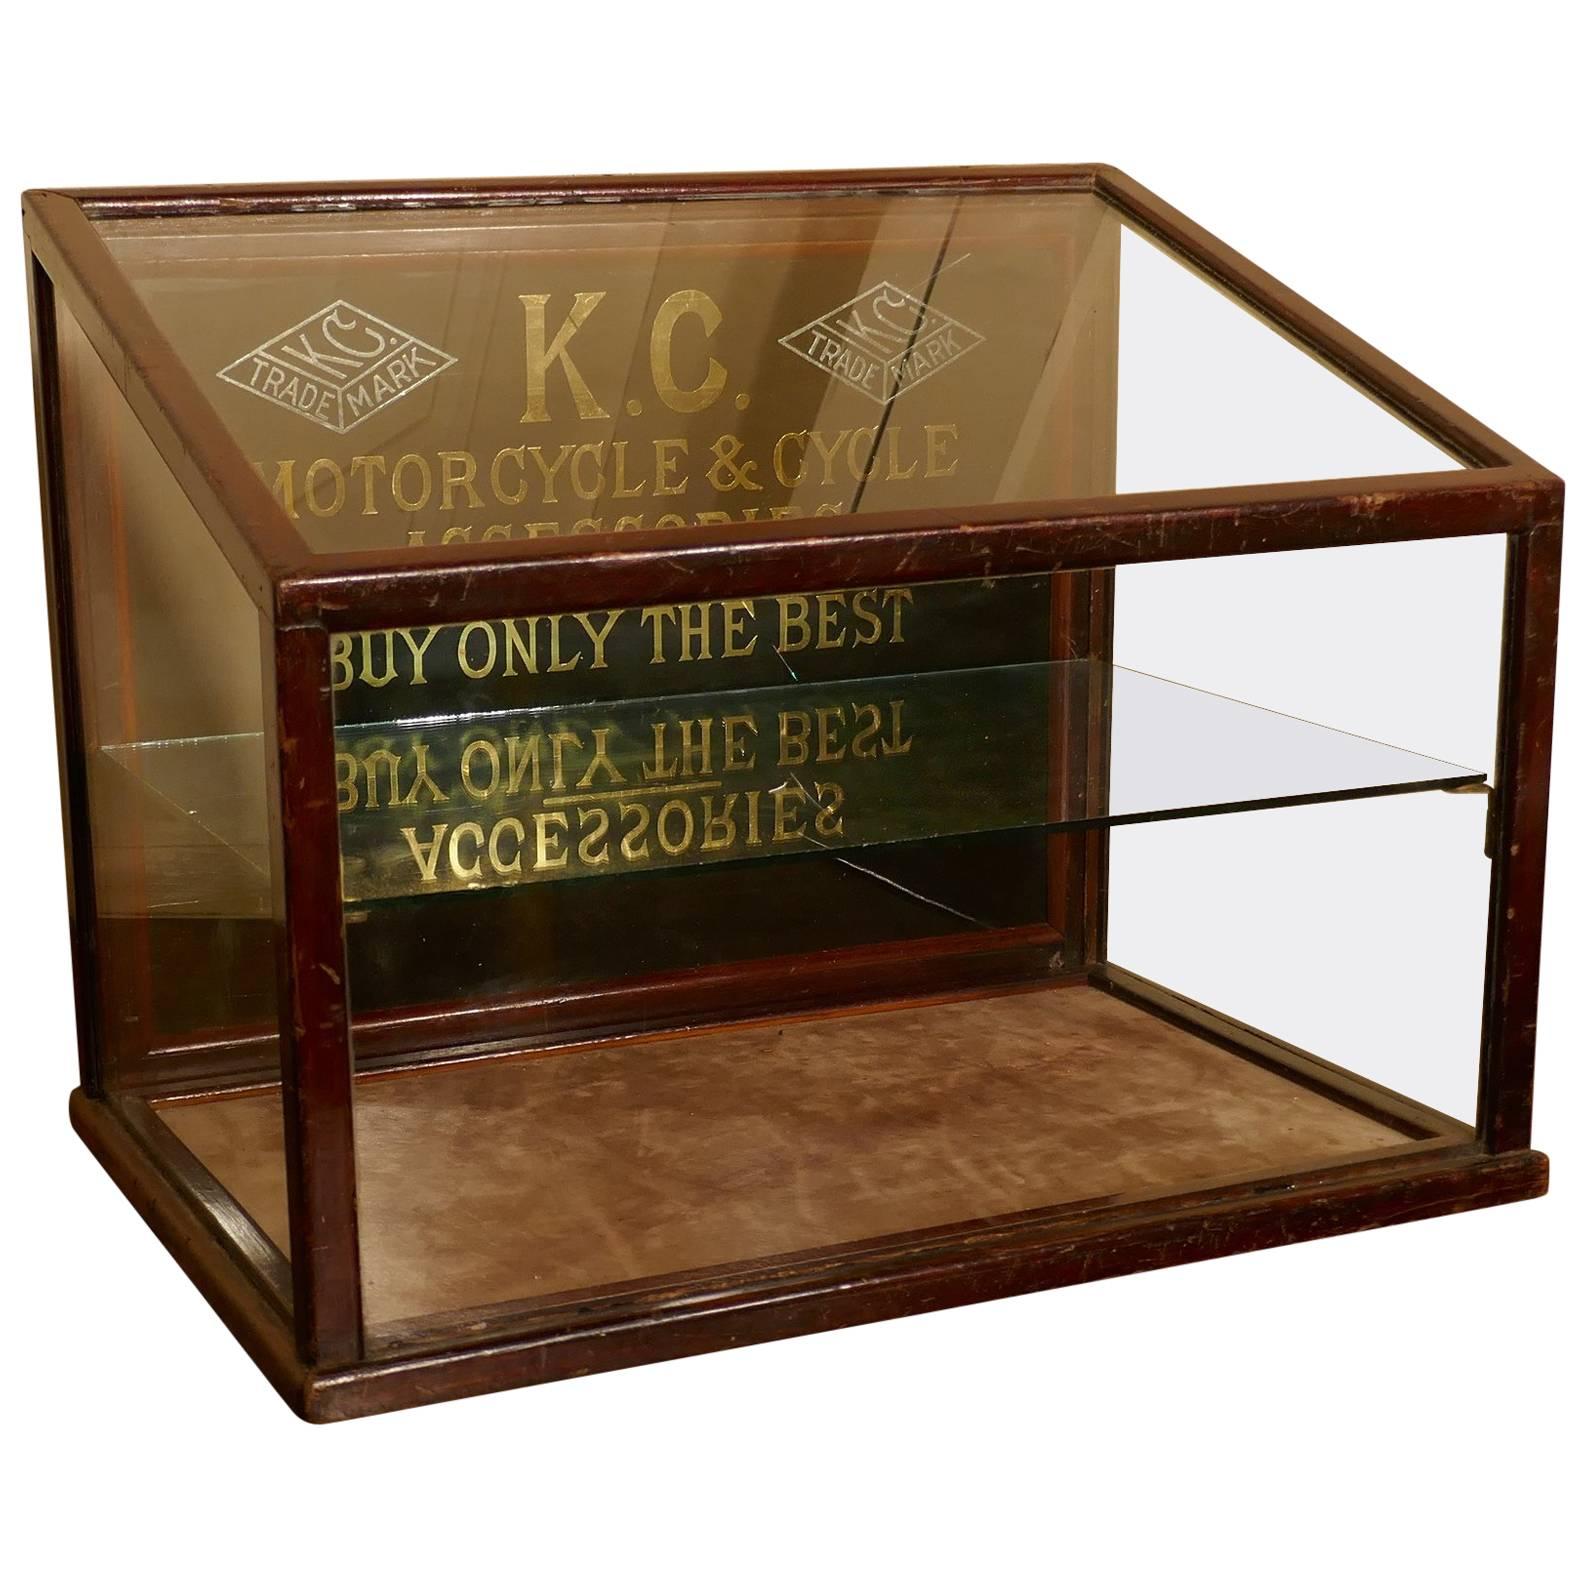 Very Rare Kansas City, Motorcycle and Cycle Accessories Display Cabinet